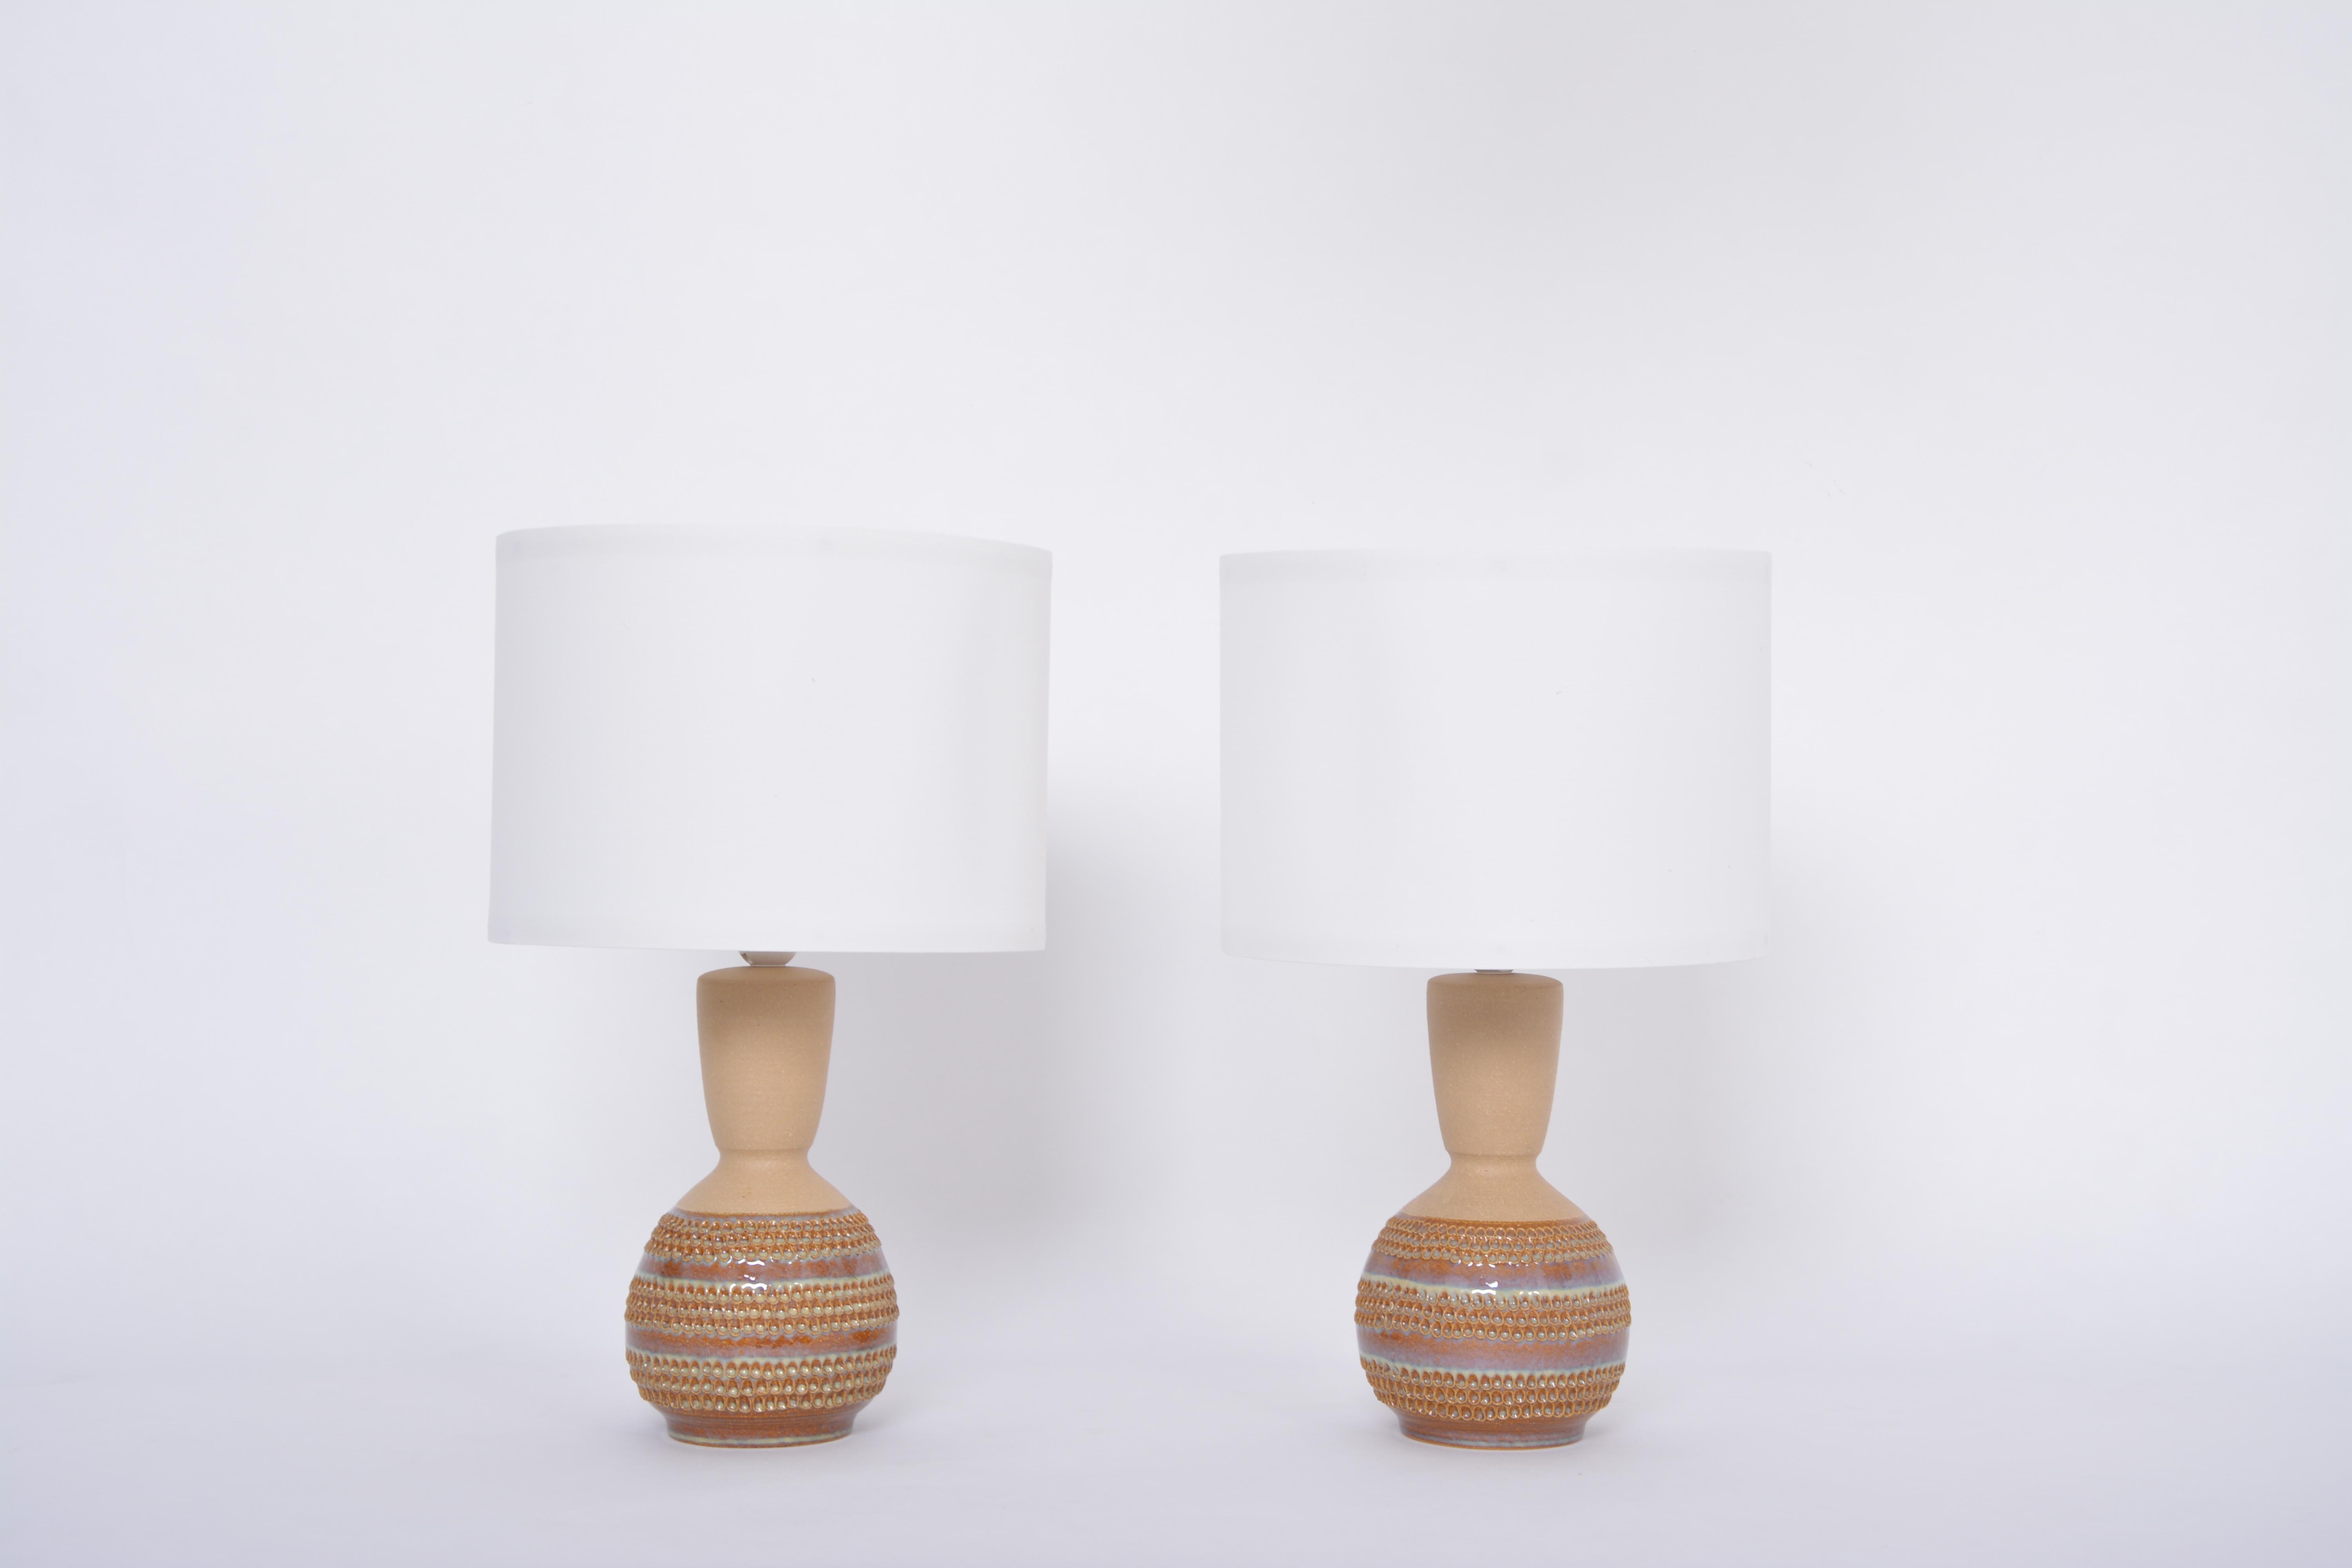 Pair of Danish Mid-Century Modern Ceramic table lamps model 3038 by Soholm
This pair of ceramic table lamps was produced by Soholm Stentoj in Denmark in the 1970s. Gorgeous handmade lamp bases of round shapes with long conic necks. The bases have a